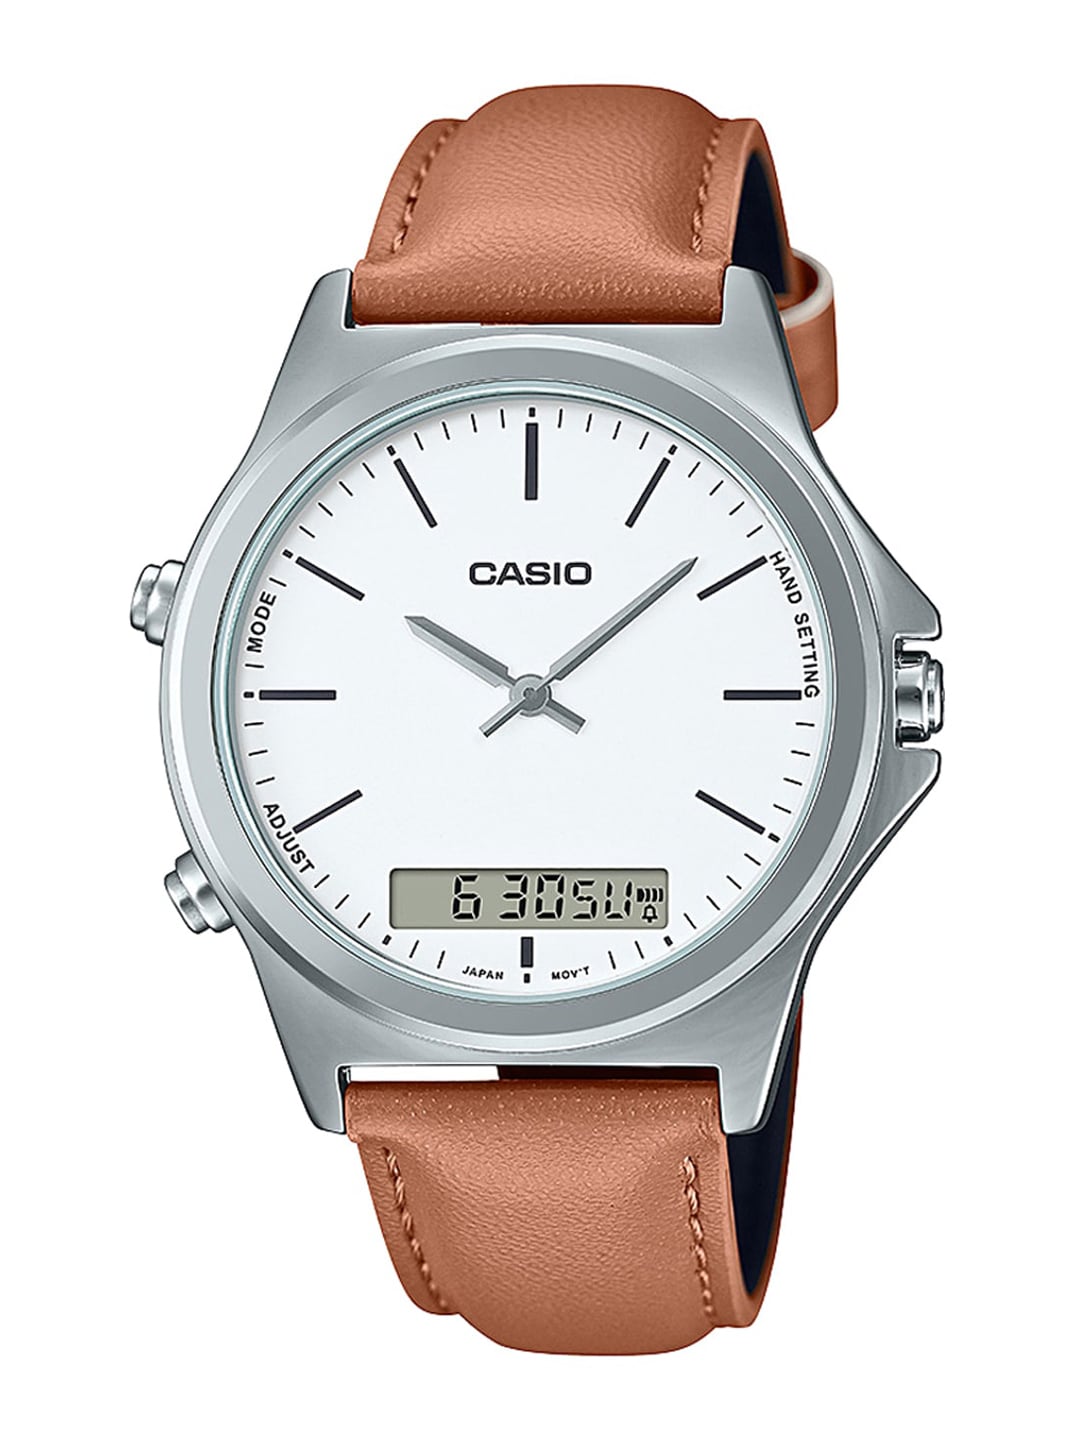 CASIO Men White Dial & Brown Leather Straps Analogue Watch